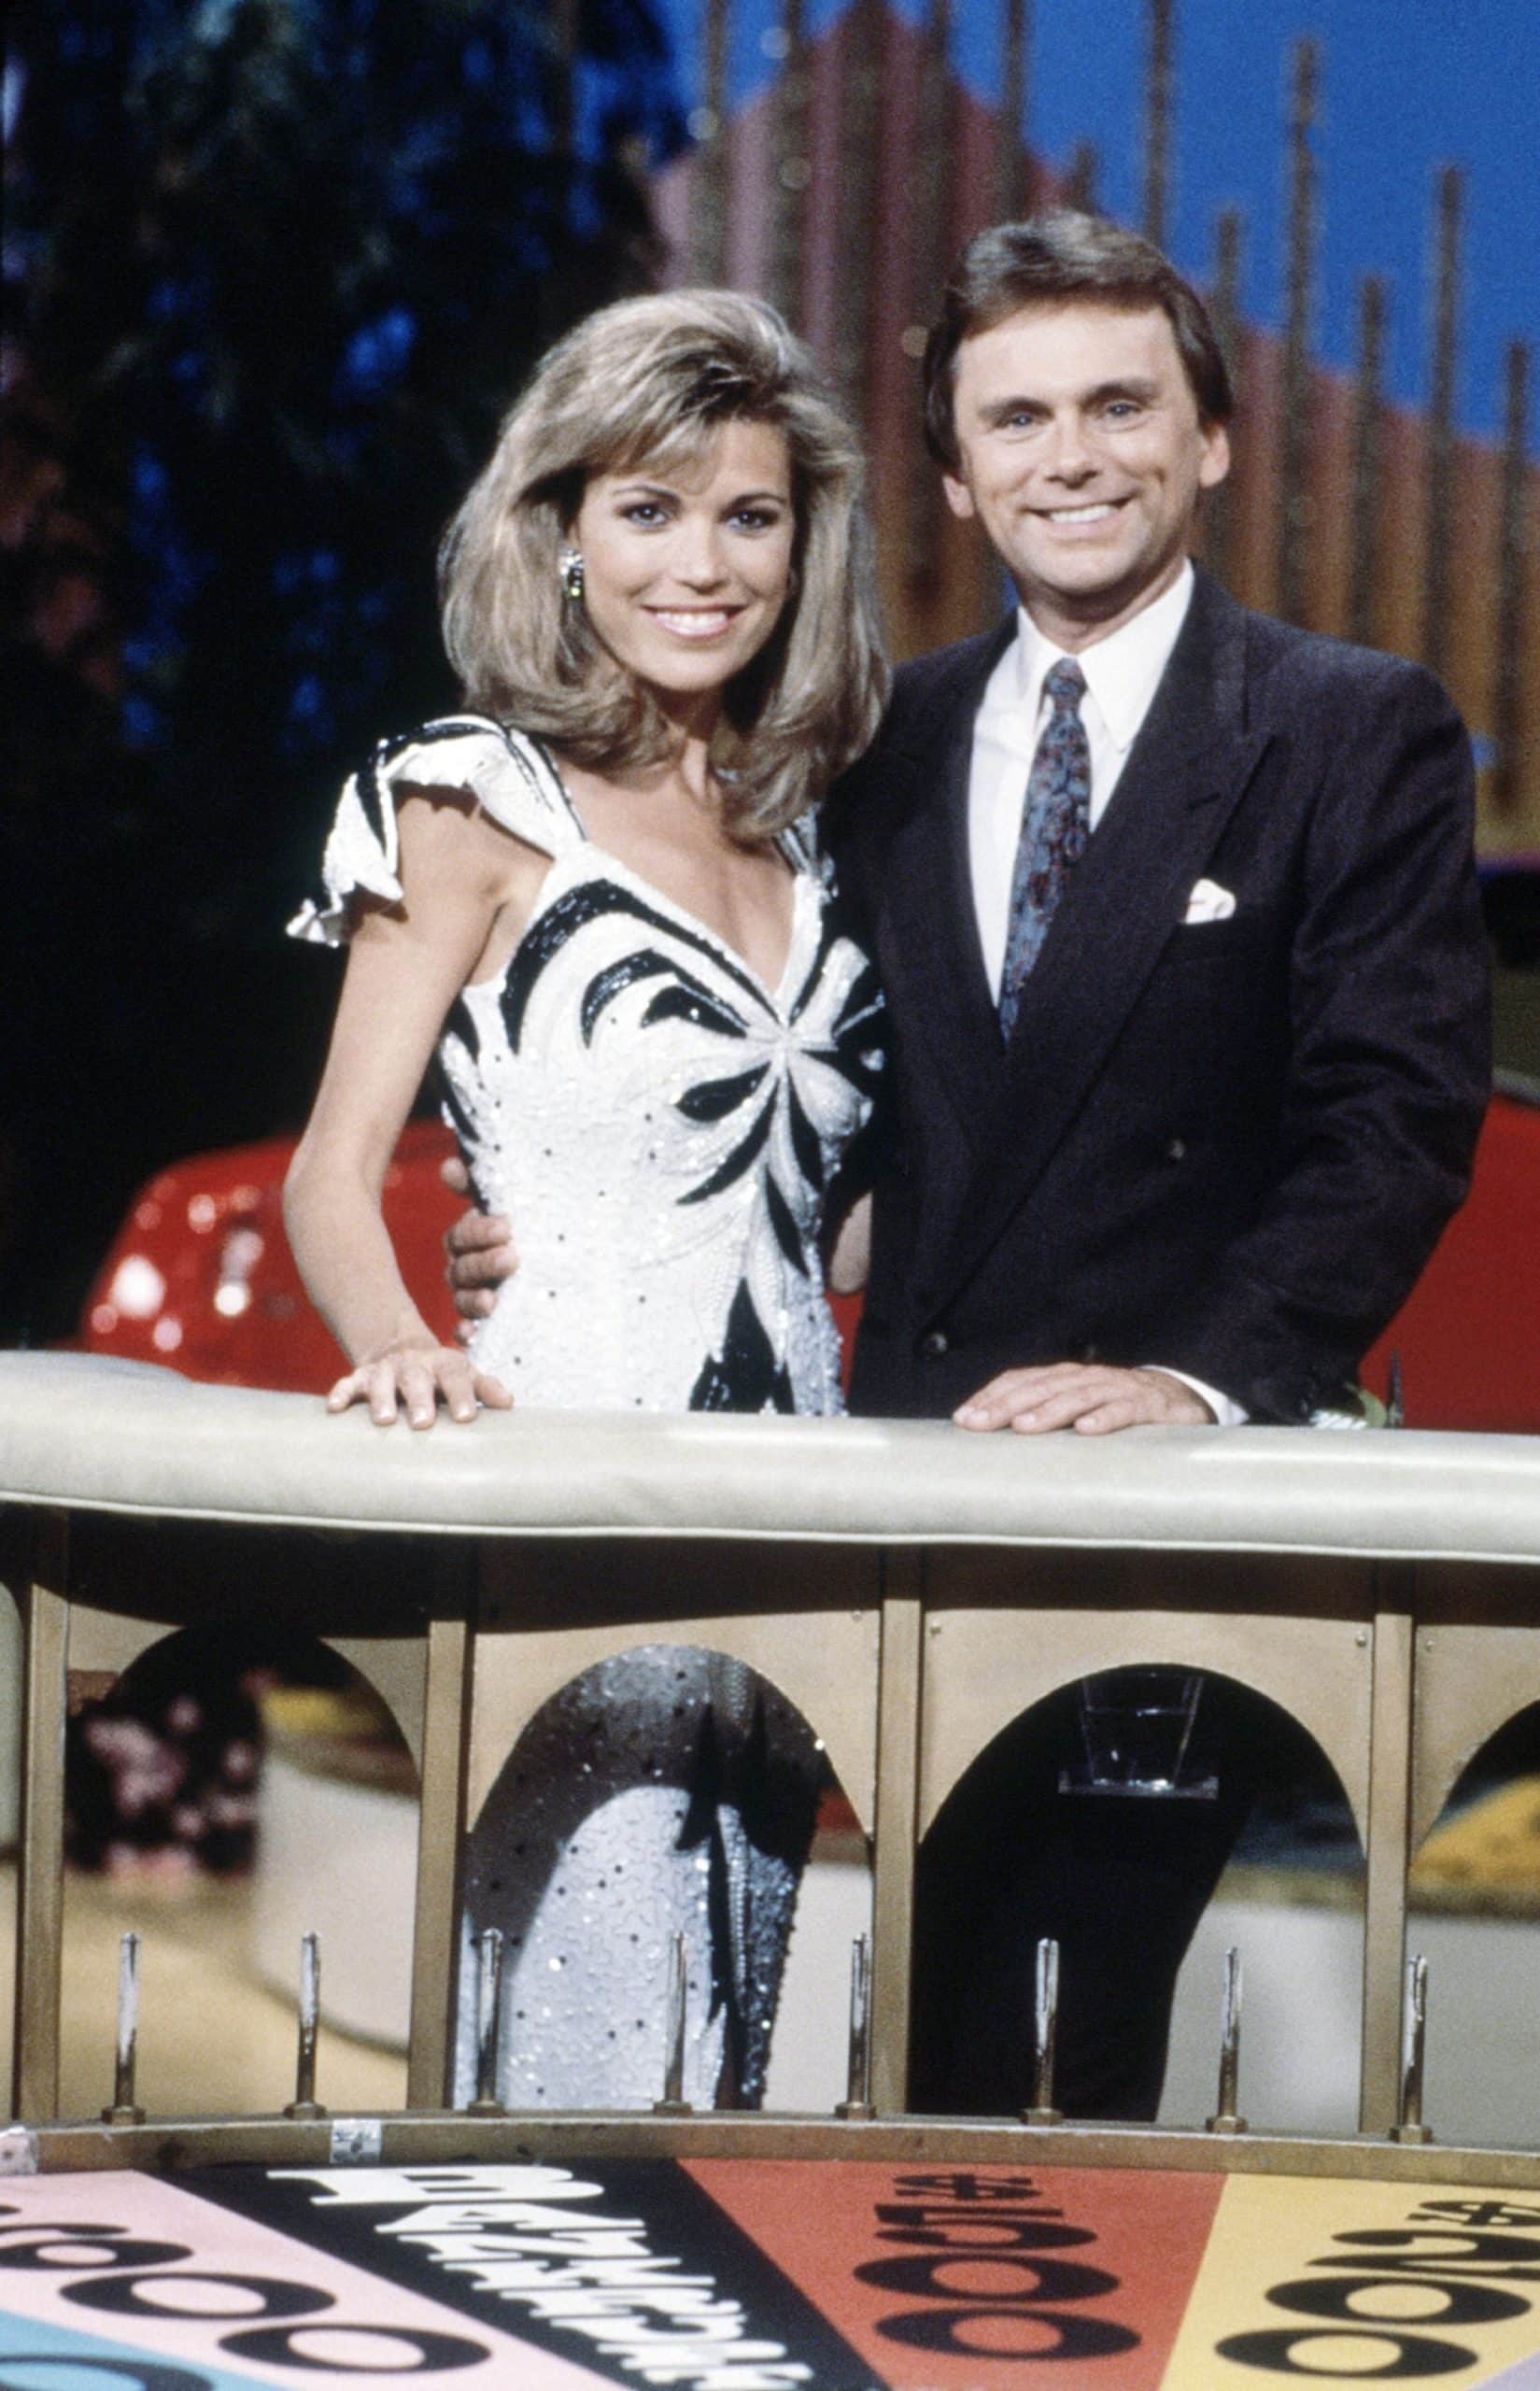 WHEEL OF FORTUNE, from left: Vanna White, Pat Sajak, (1980s)